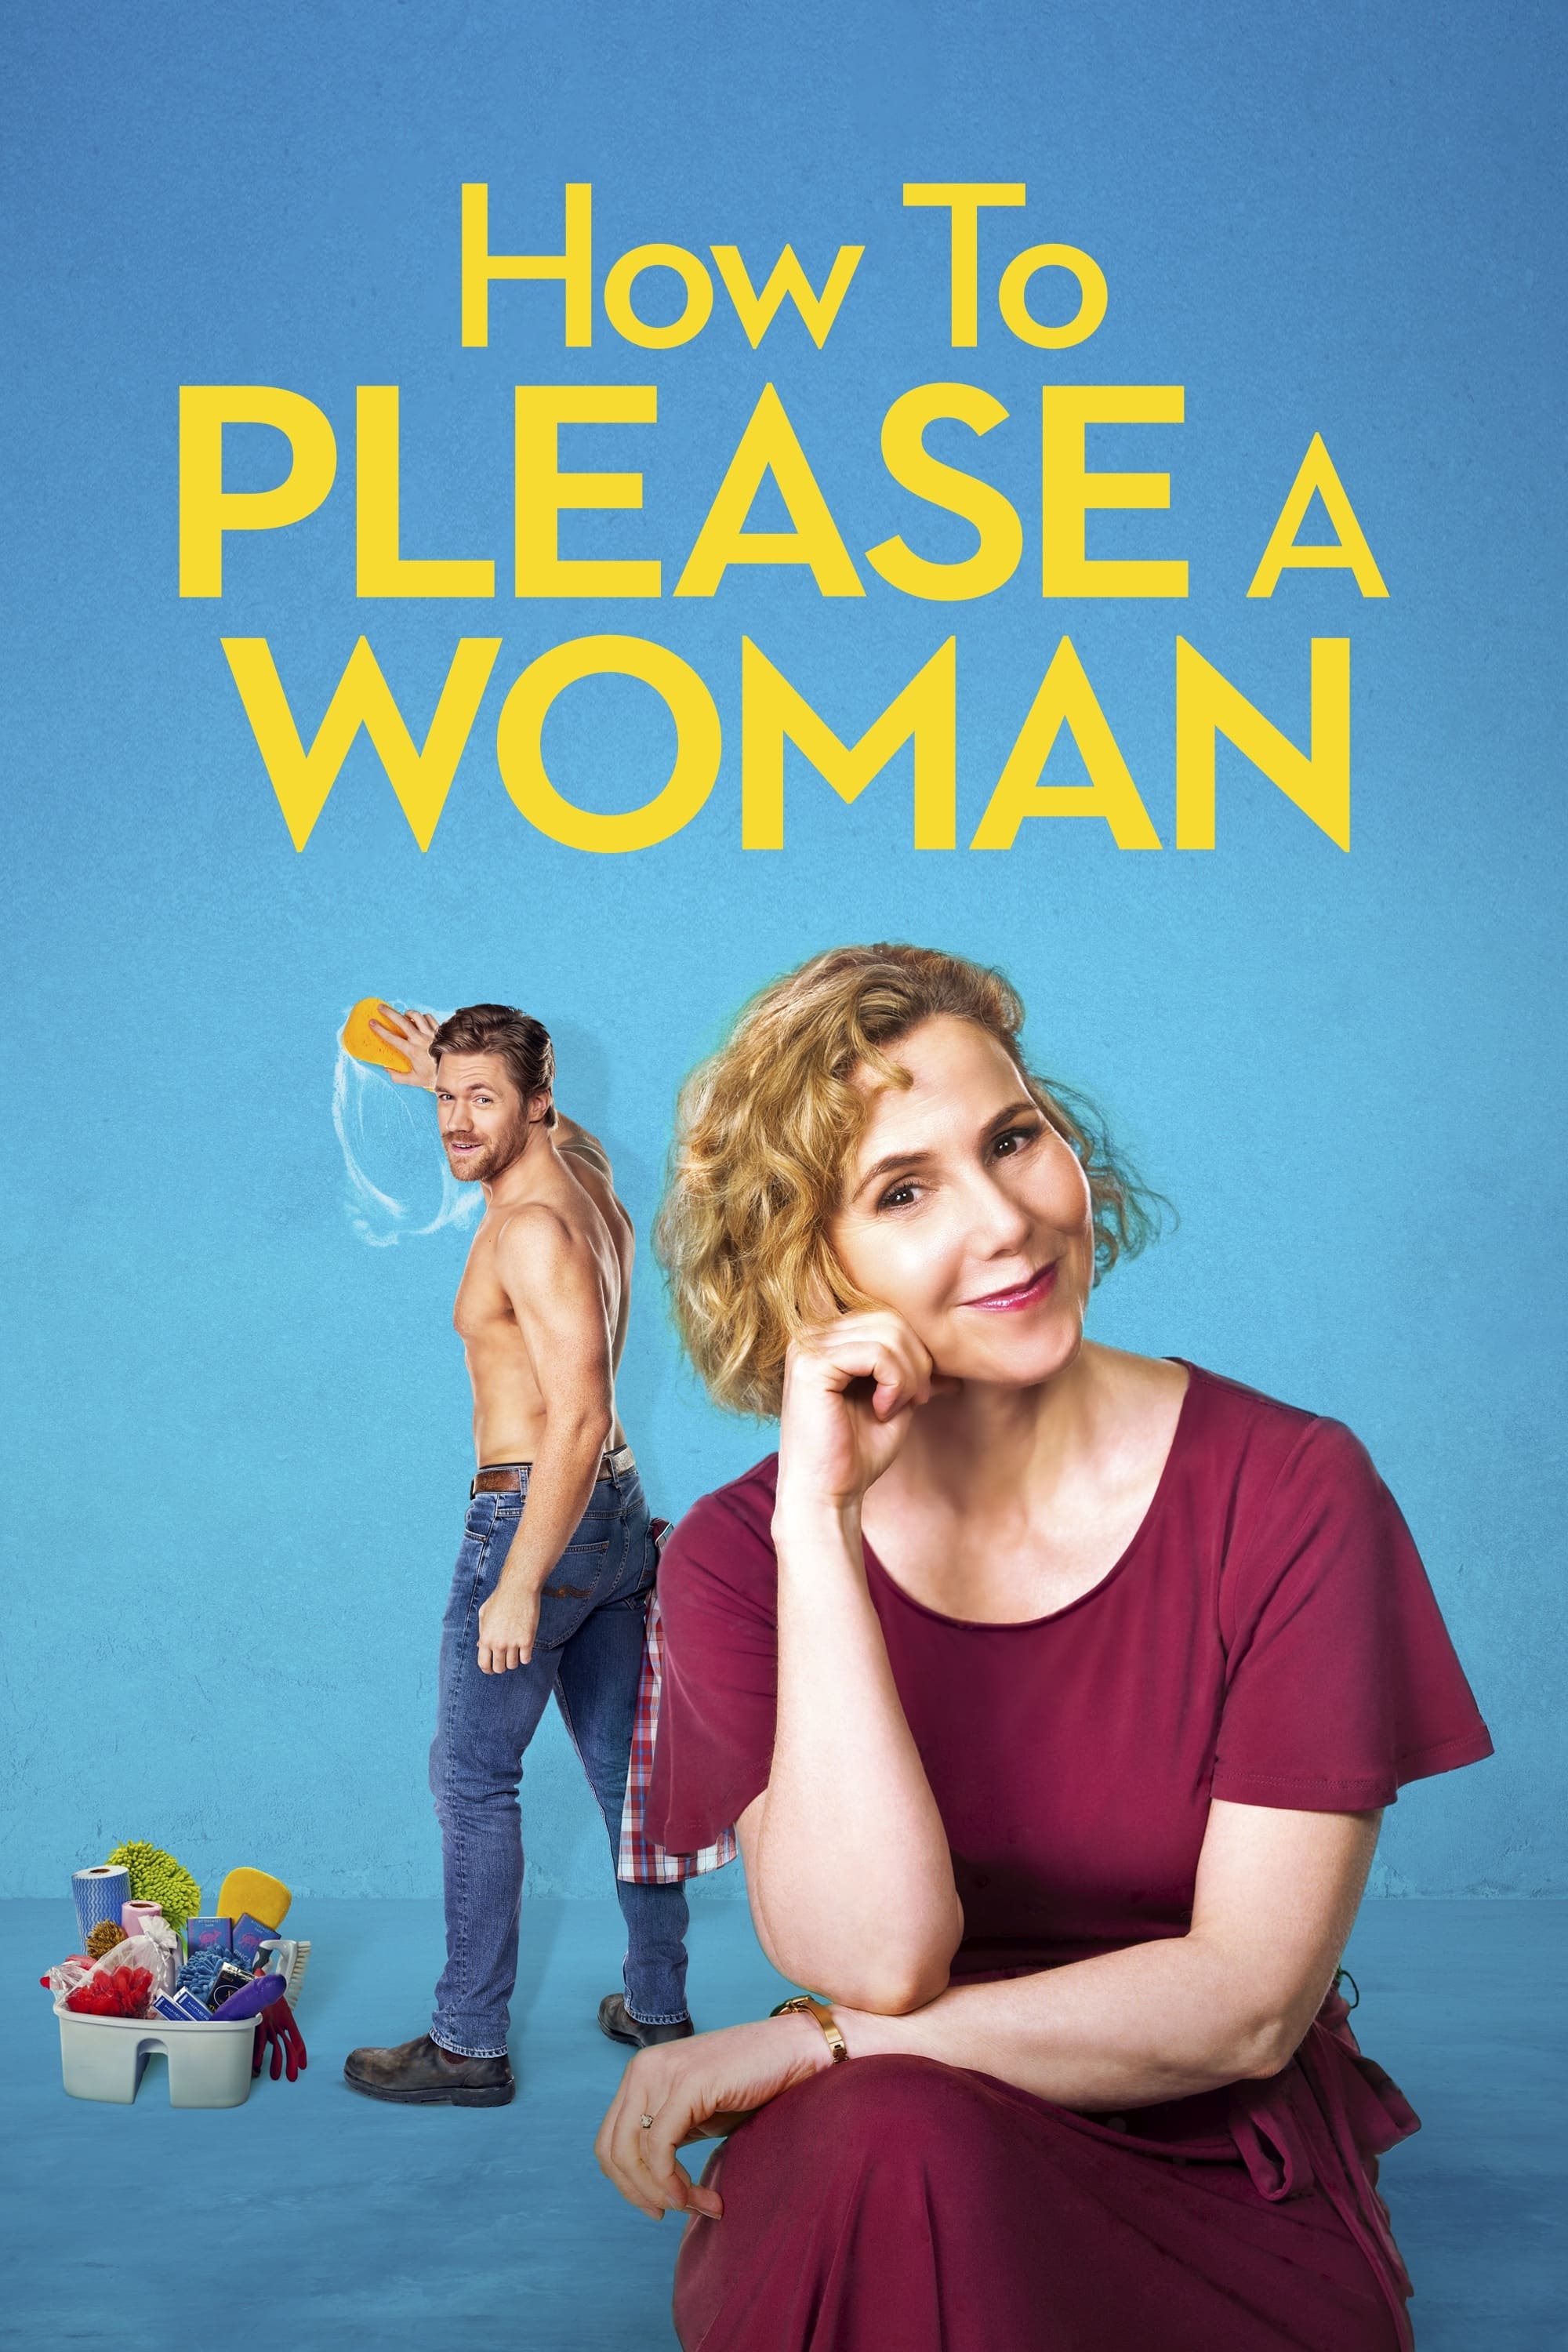 How to Please a Woman film